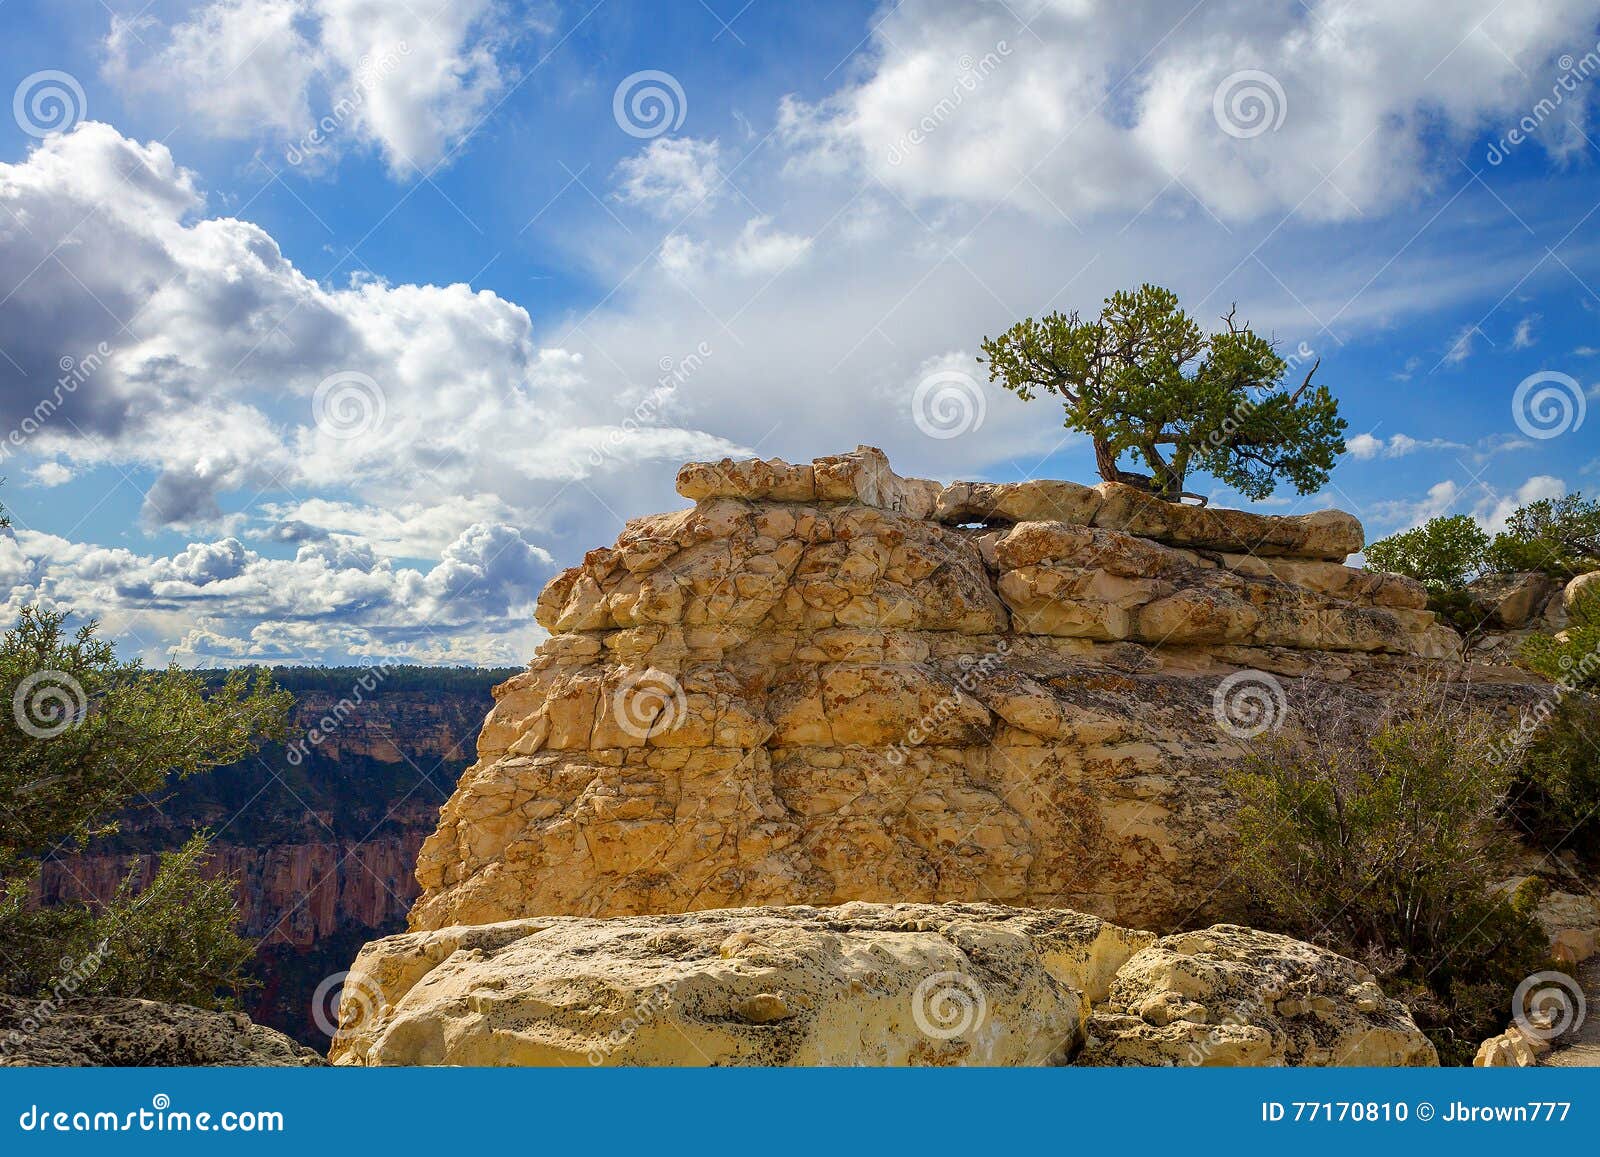 Lonely Pines in the Grand Canyon Digital Download